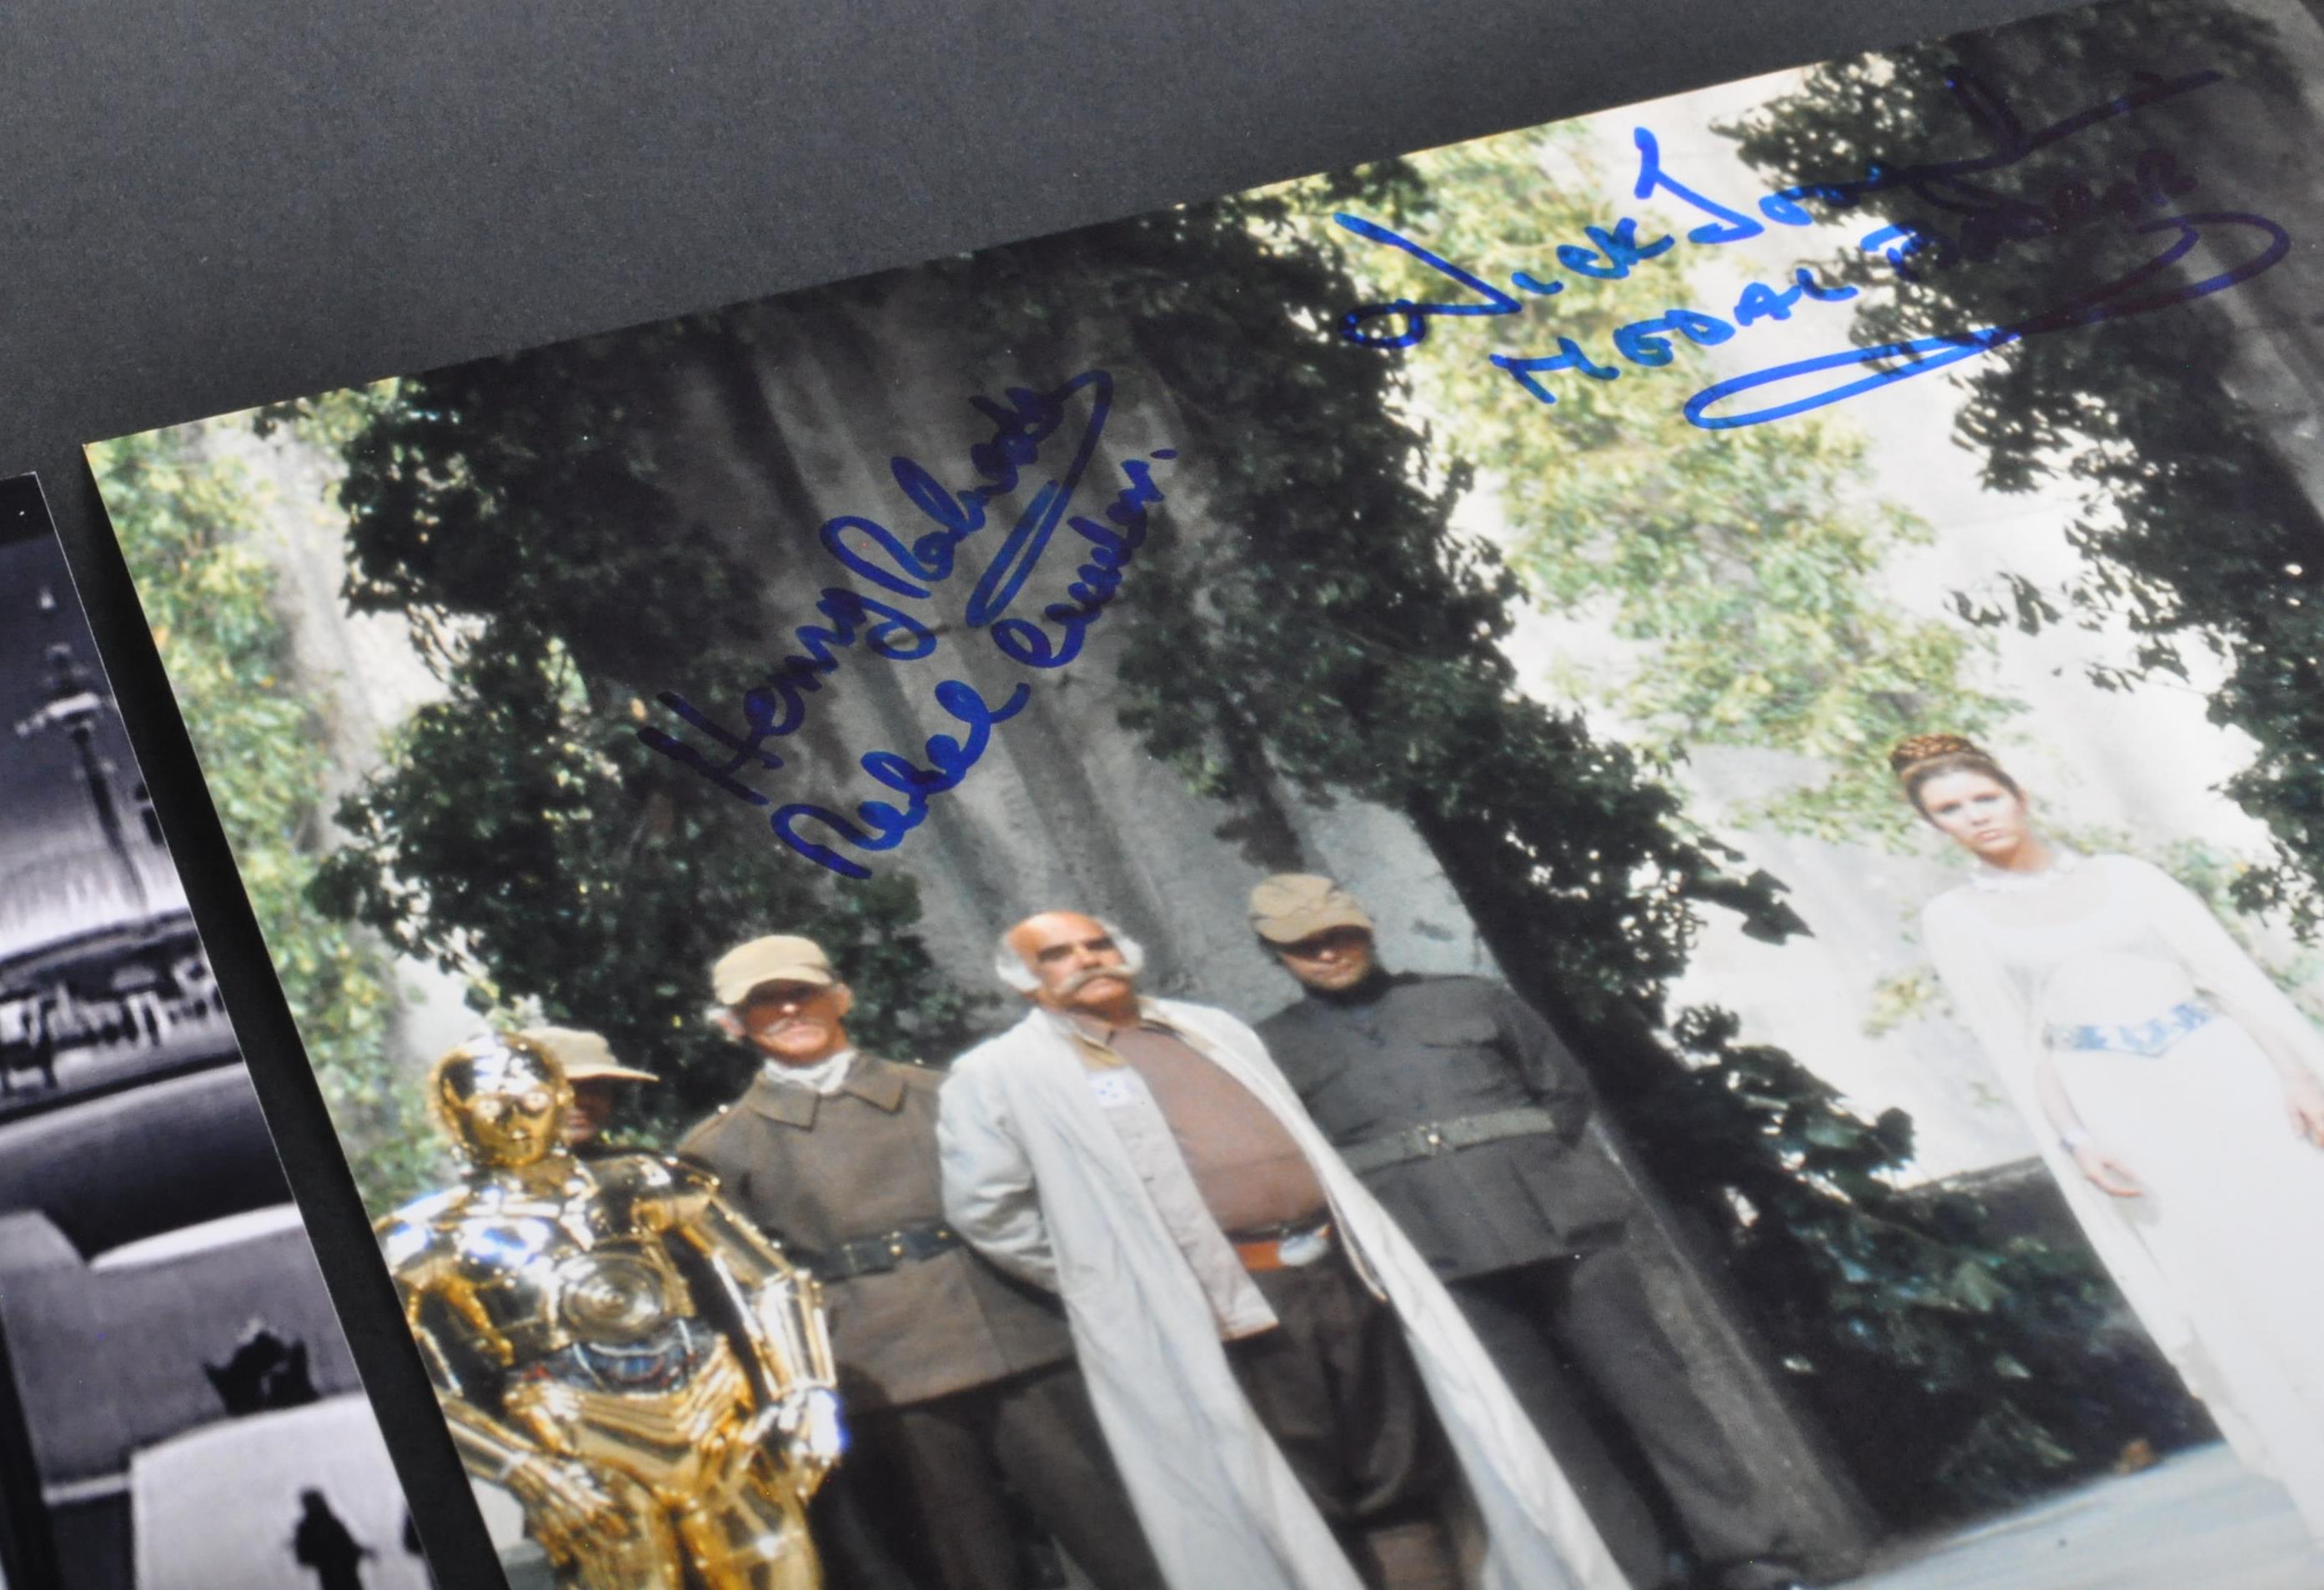 STAR WARS - WHOLE FRANCHISE - COLLECTION OF SIGNED PHOTOS - Image 6 of 6